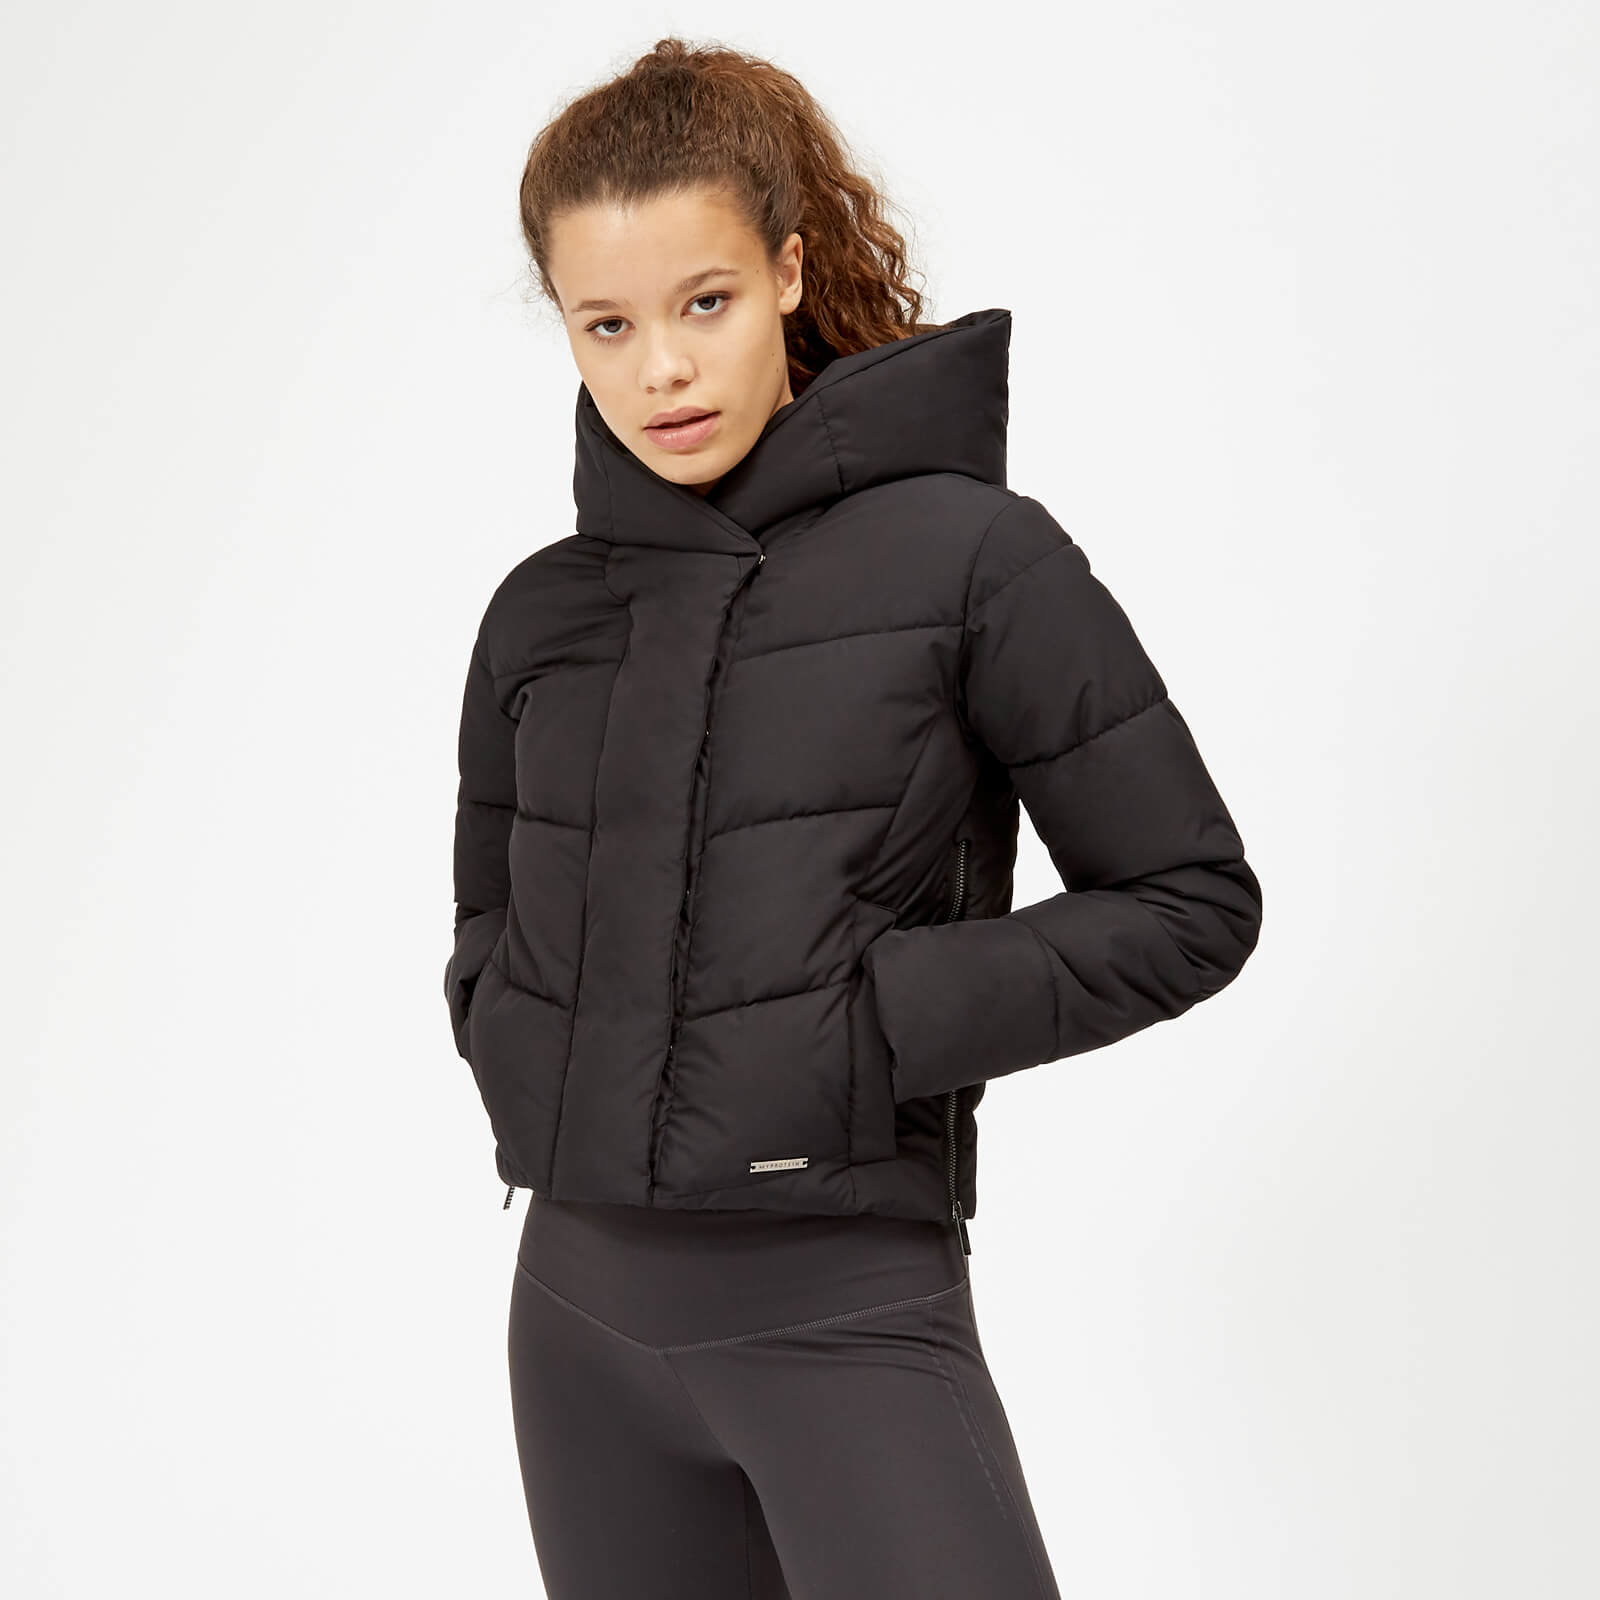 Myprotein Pro Tech Protect Puffer Jacket - Black